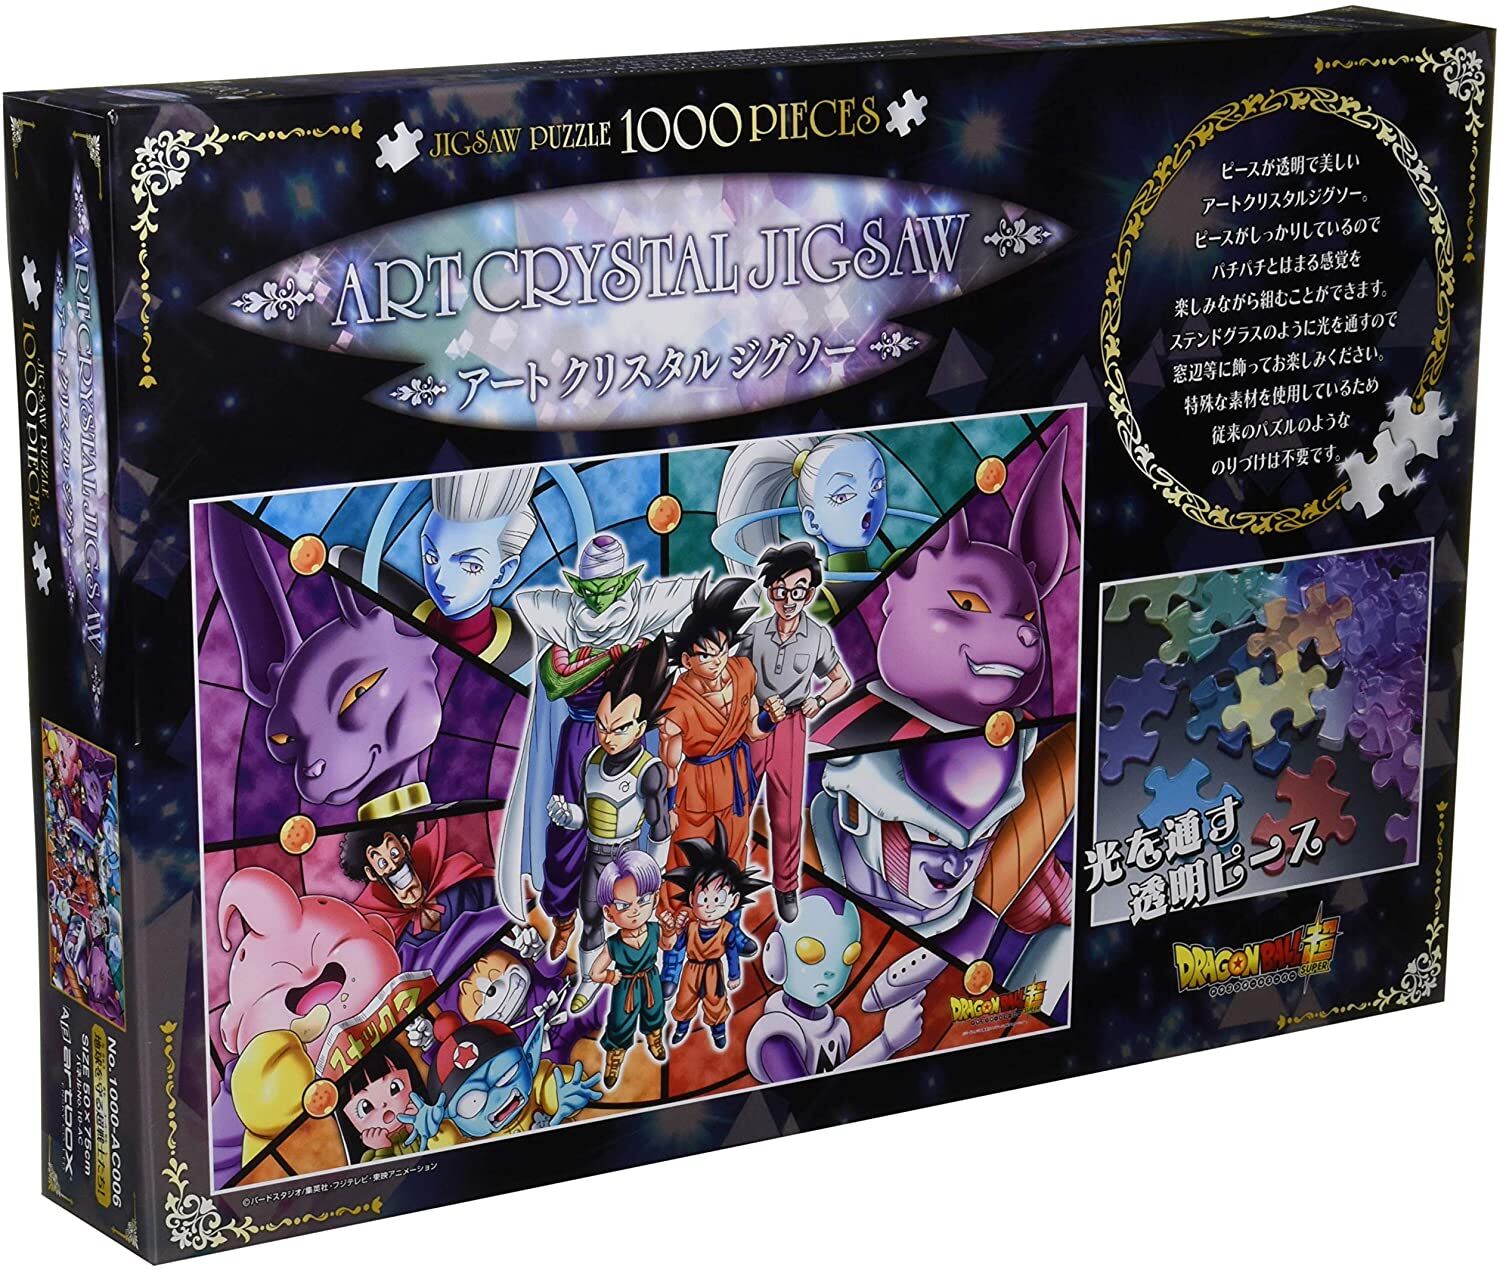 (PUZZLE) Dragon Ball Z Puzzle Jigsaw Super Warriors Defense the Earth! Art Crystal (1000 Pieces)